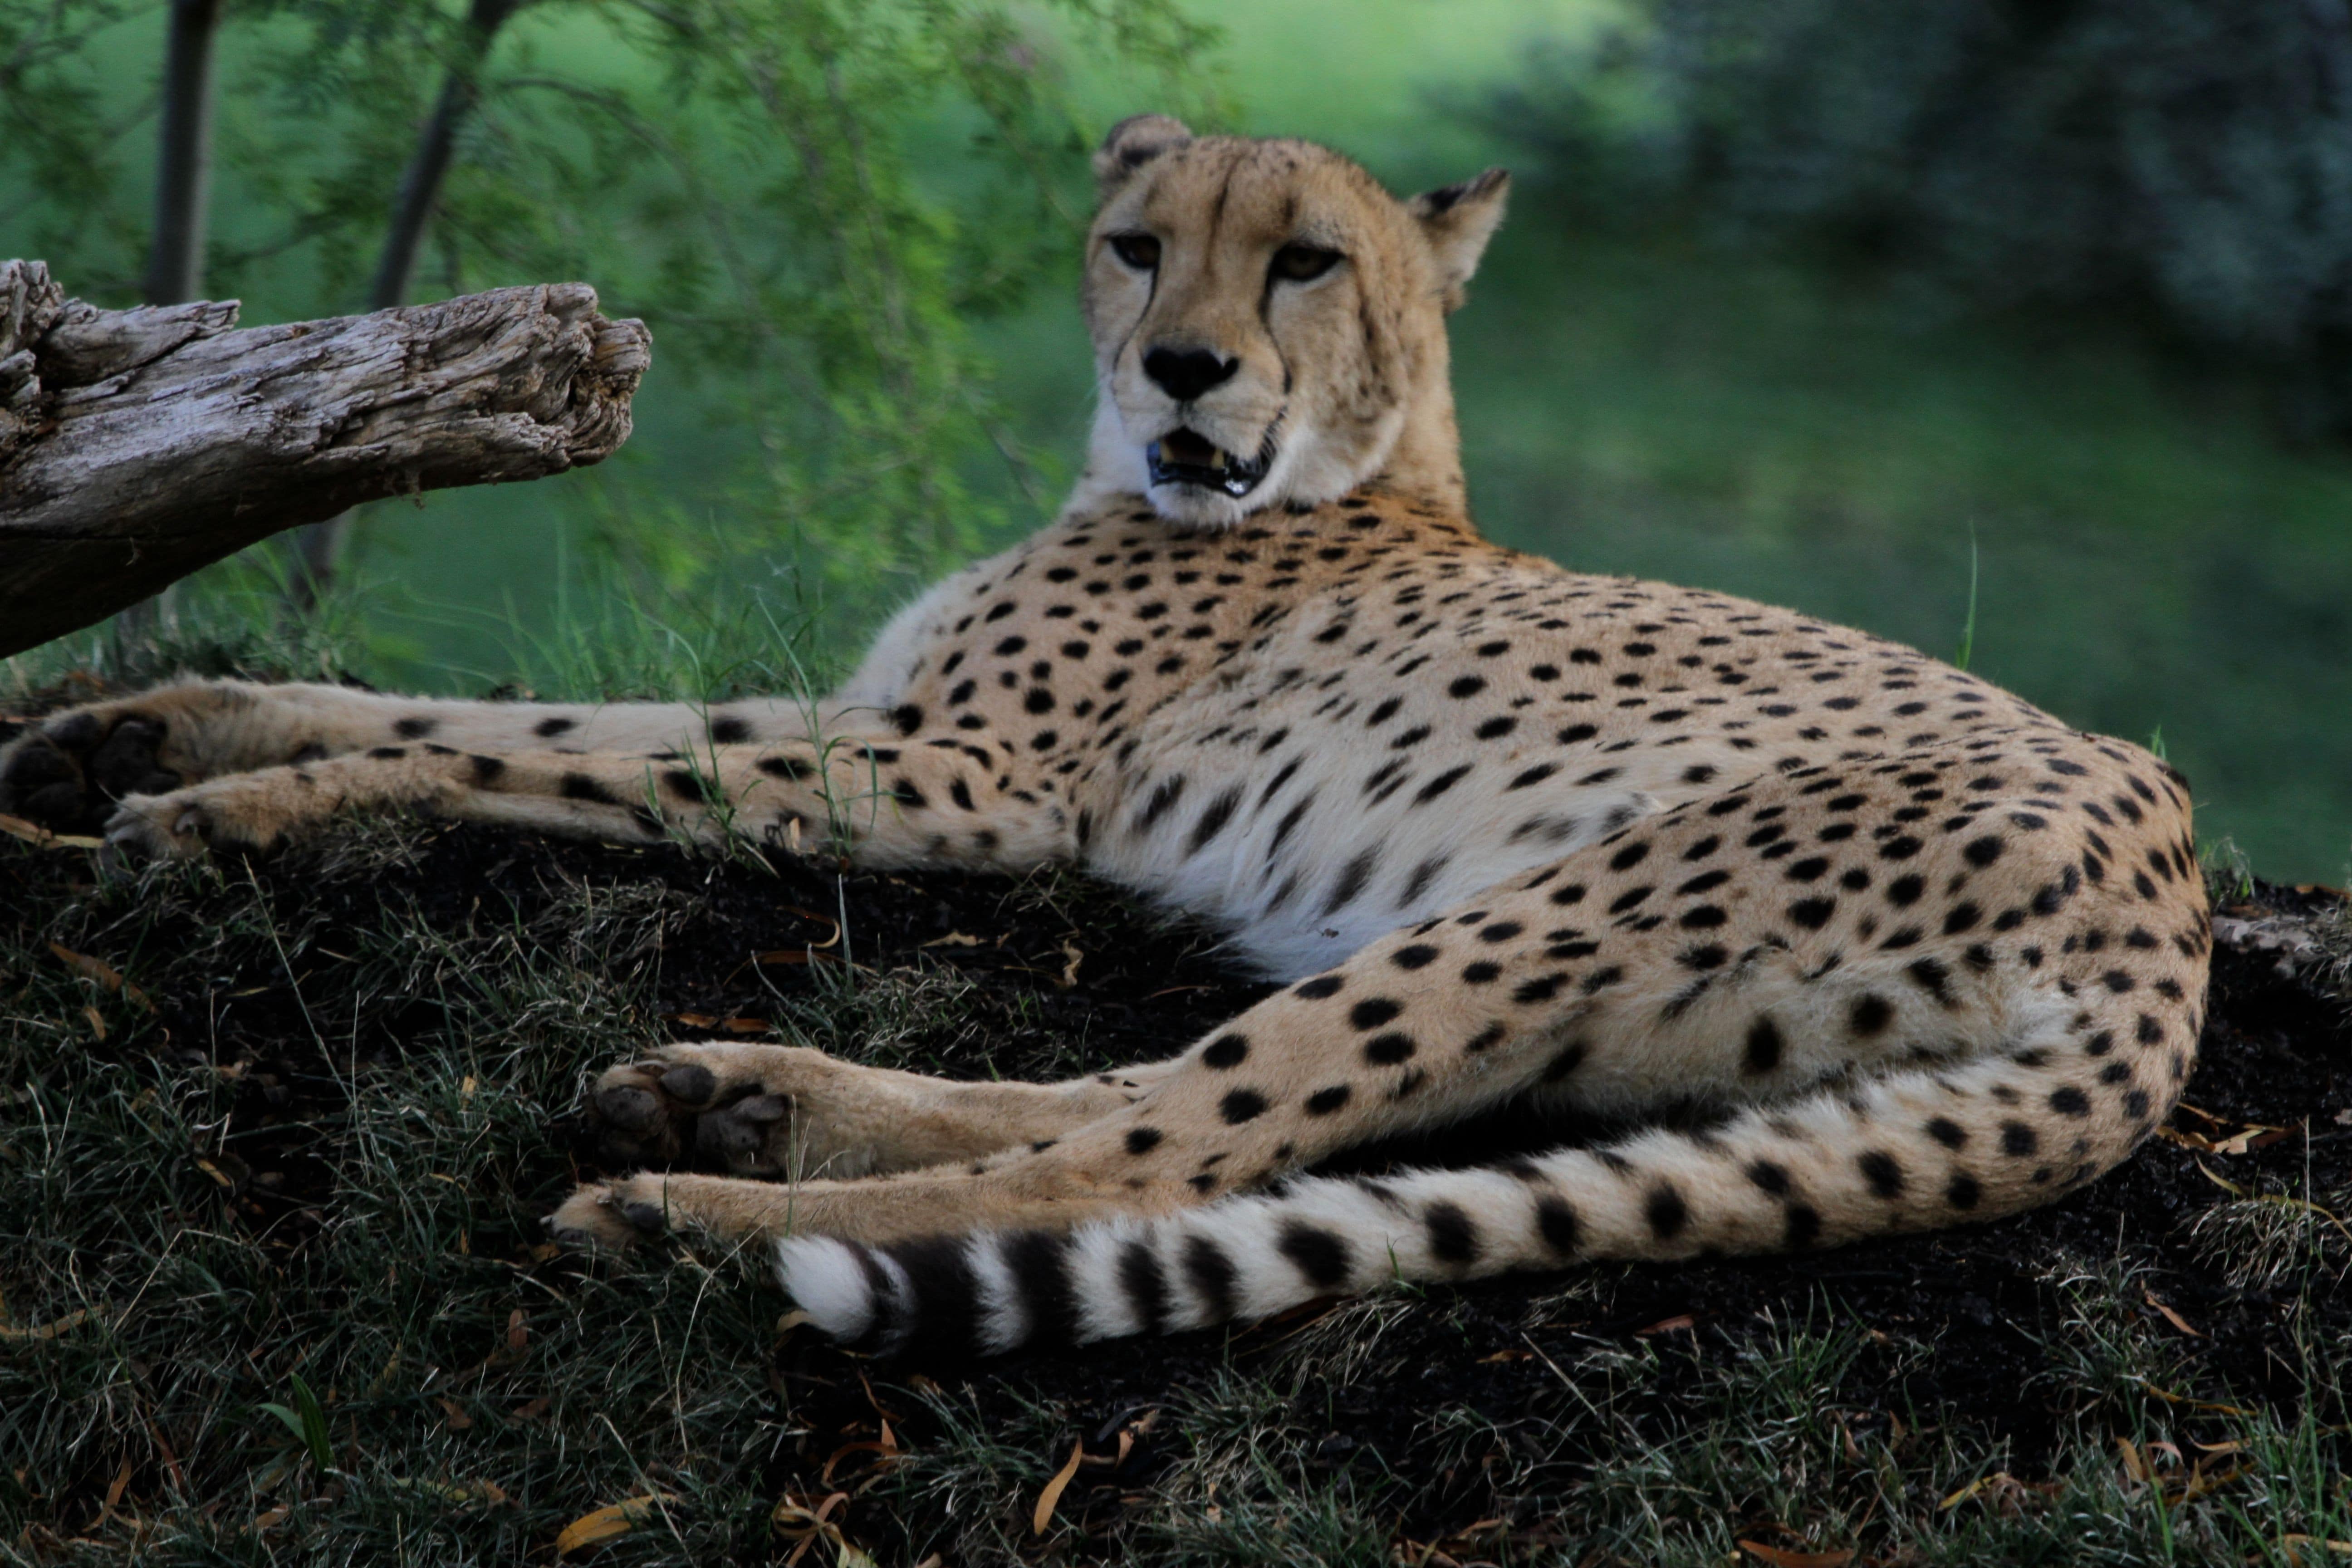 This cheetah represents only 7500 cheetahs left in the world. They are specialized animals with bodies built for speed.